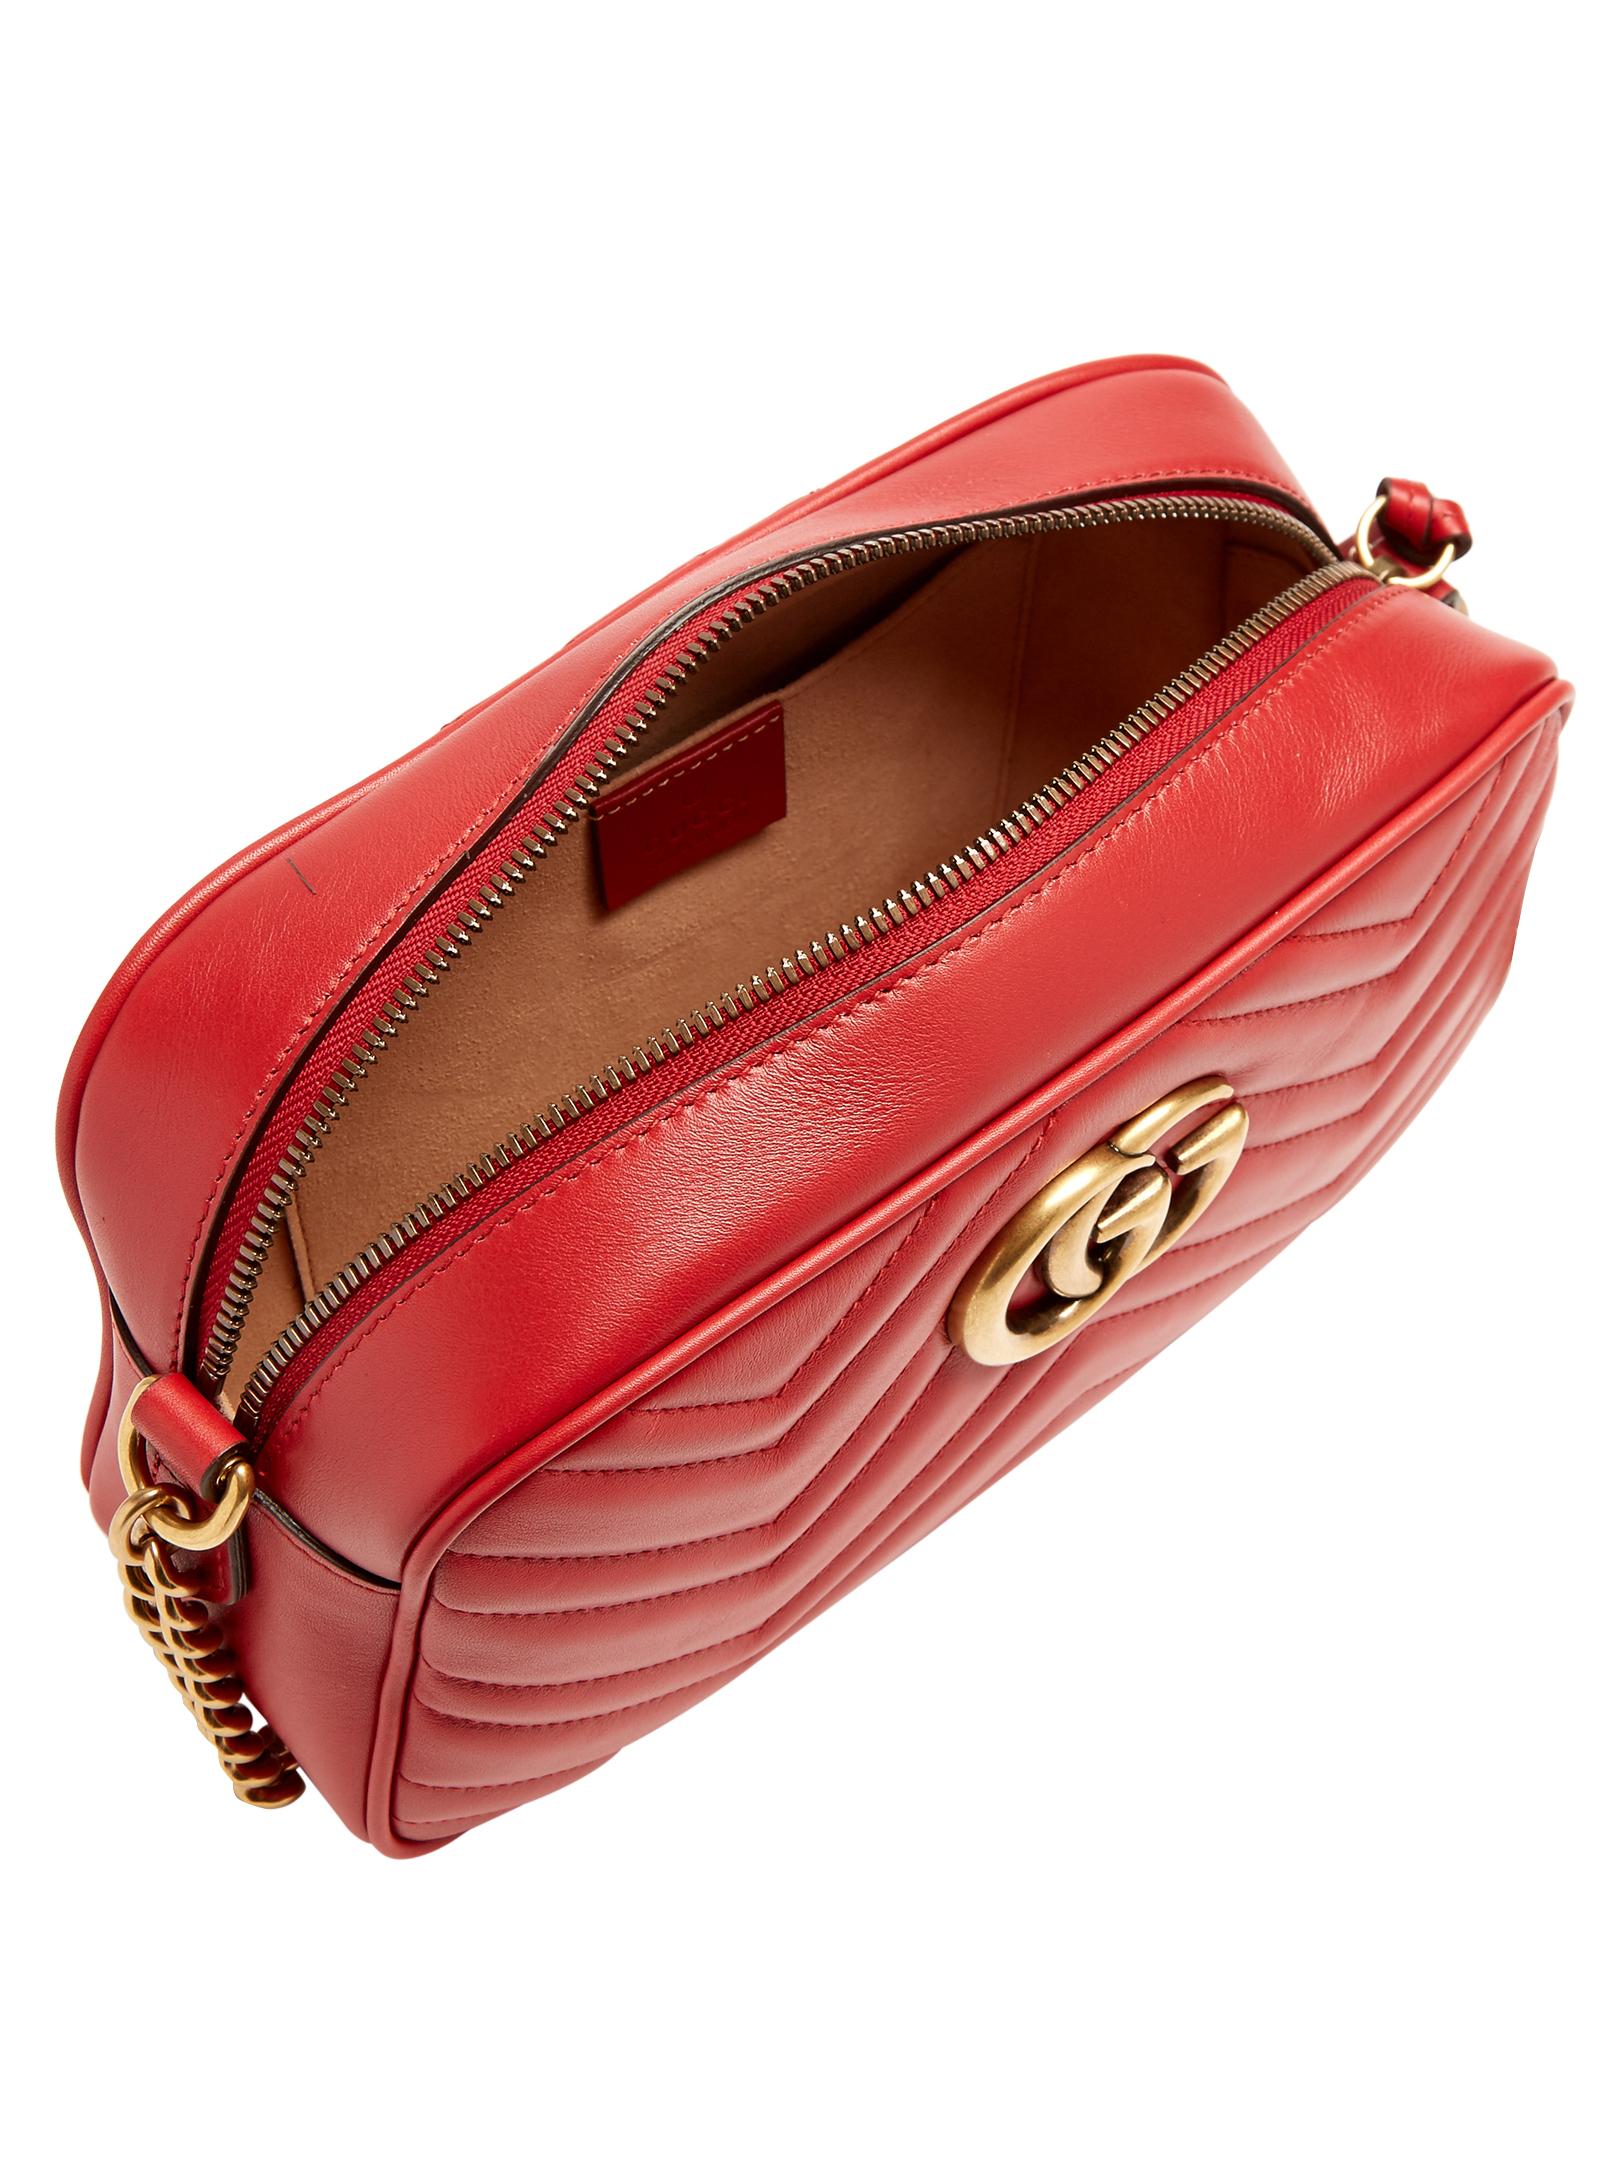 Gucci Gg Marmont Small Quilted-leather Cross-body Bag in Red - Lyst